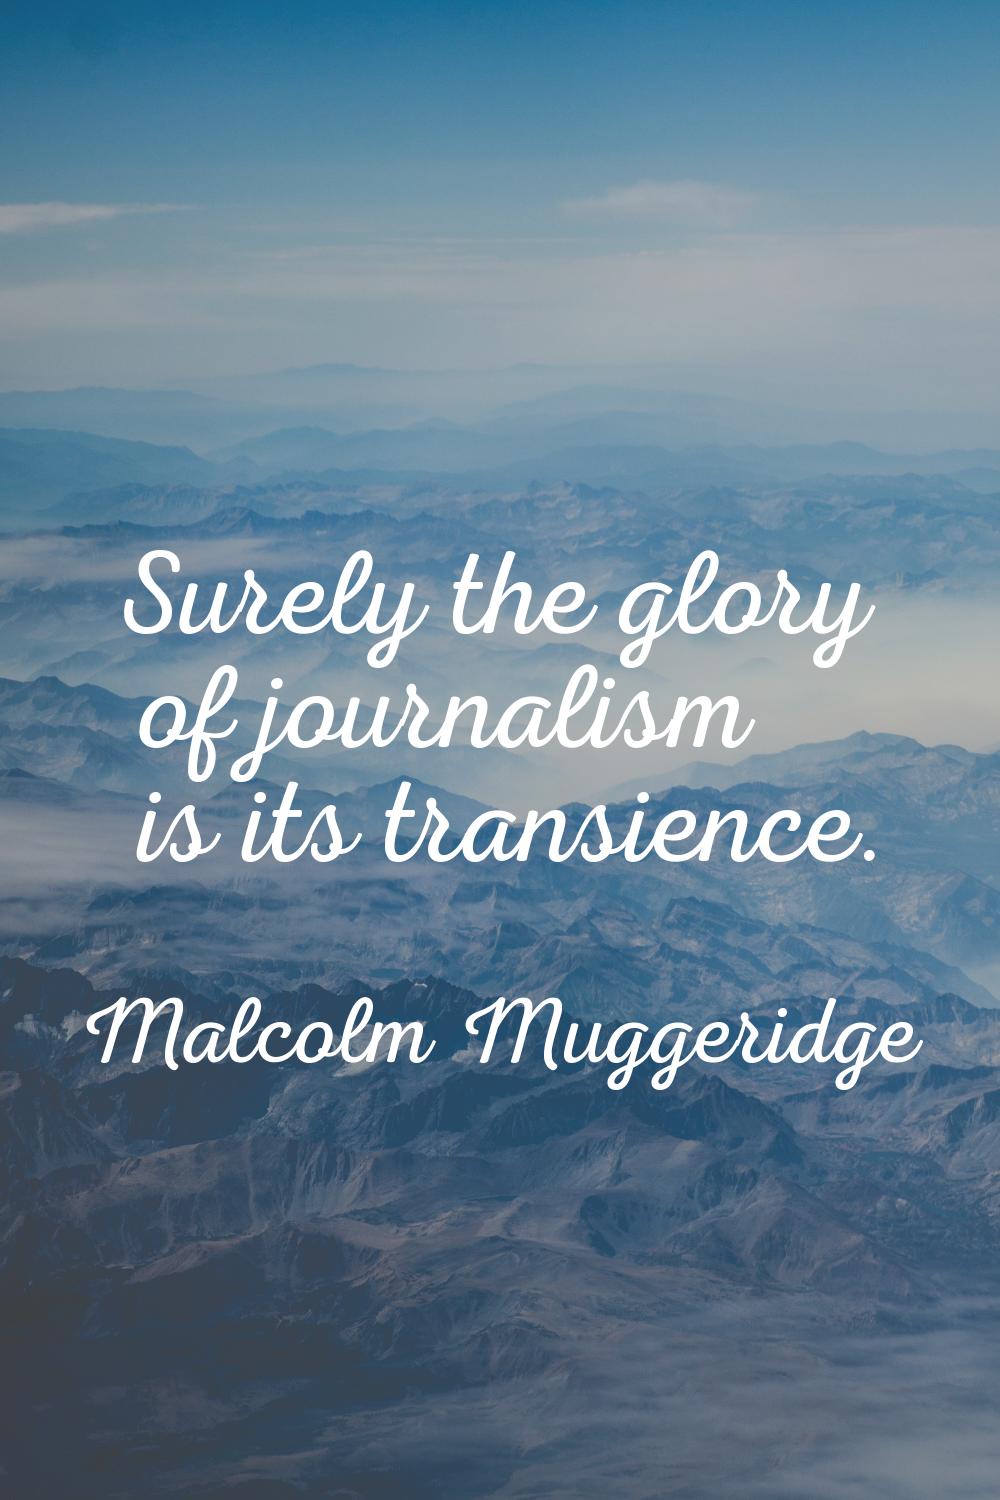 Surely the glory of journalism is its transience.